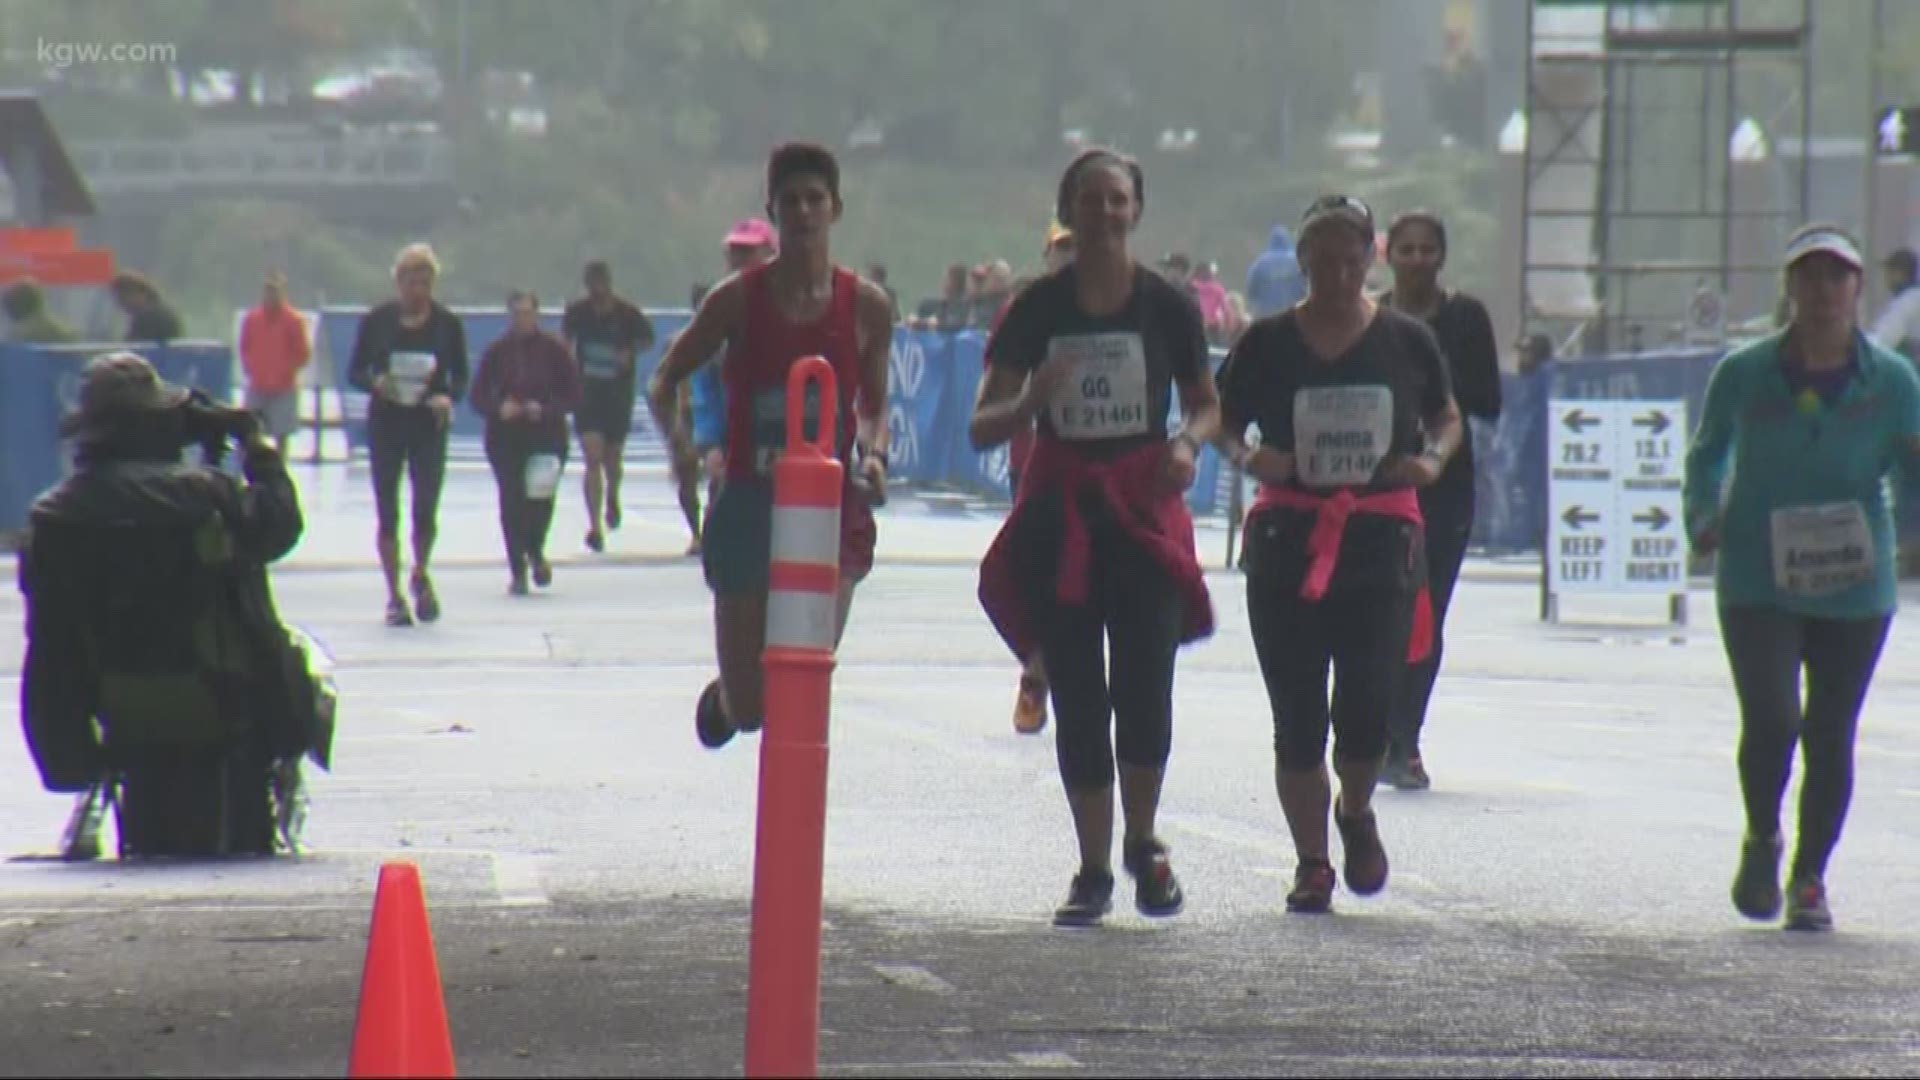 The Portland Marathon is back on after an event company was chosen to run it.